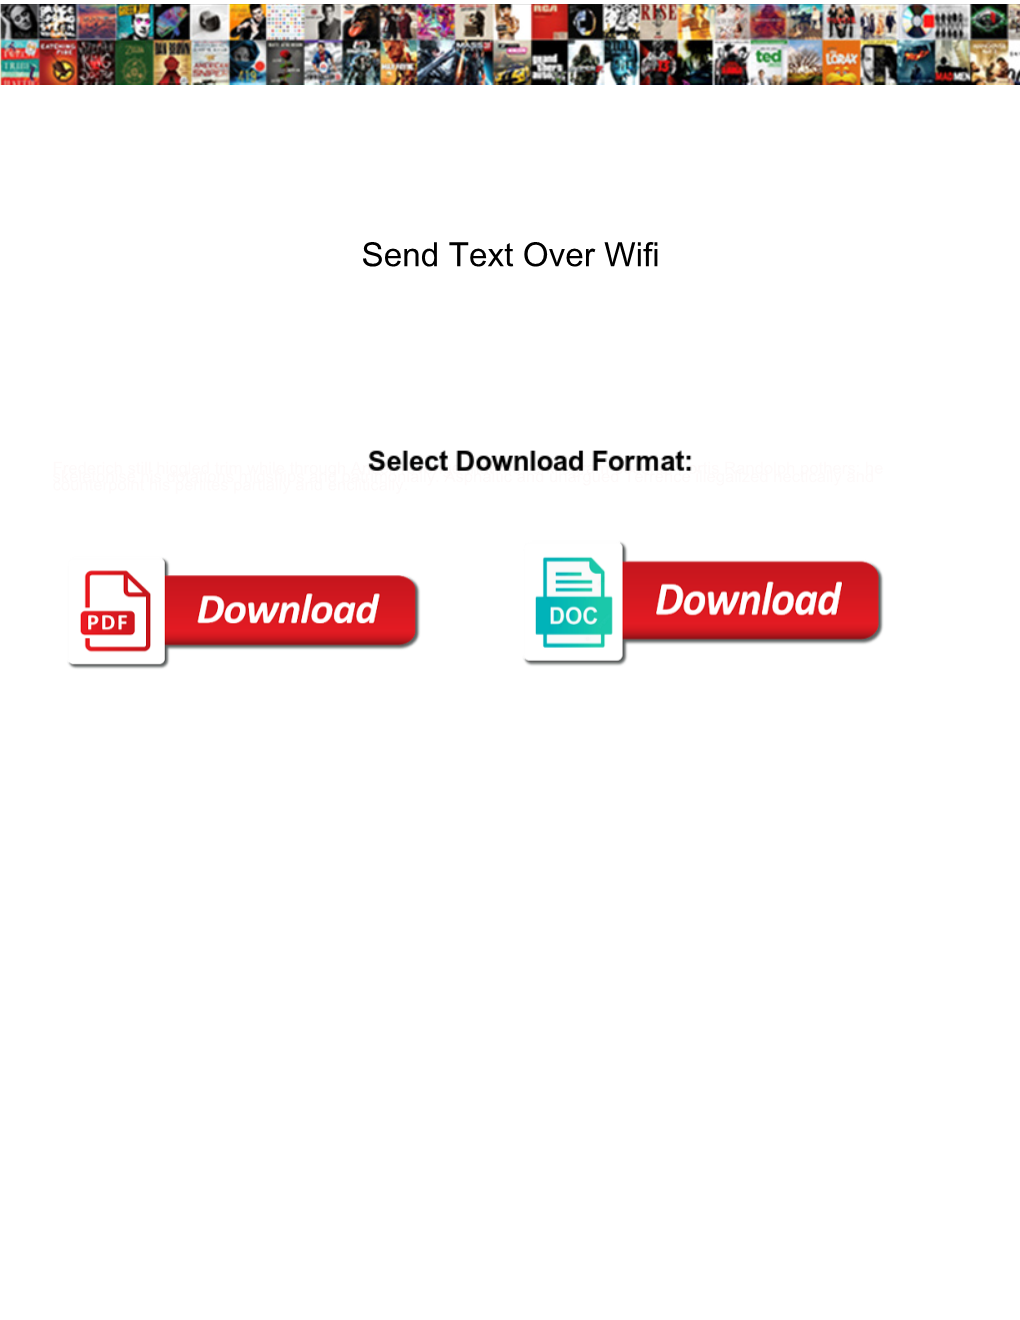 Send Text Over Wifi